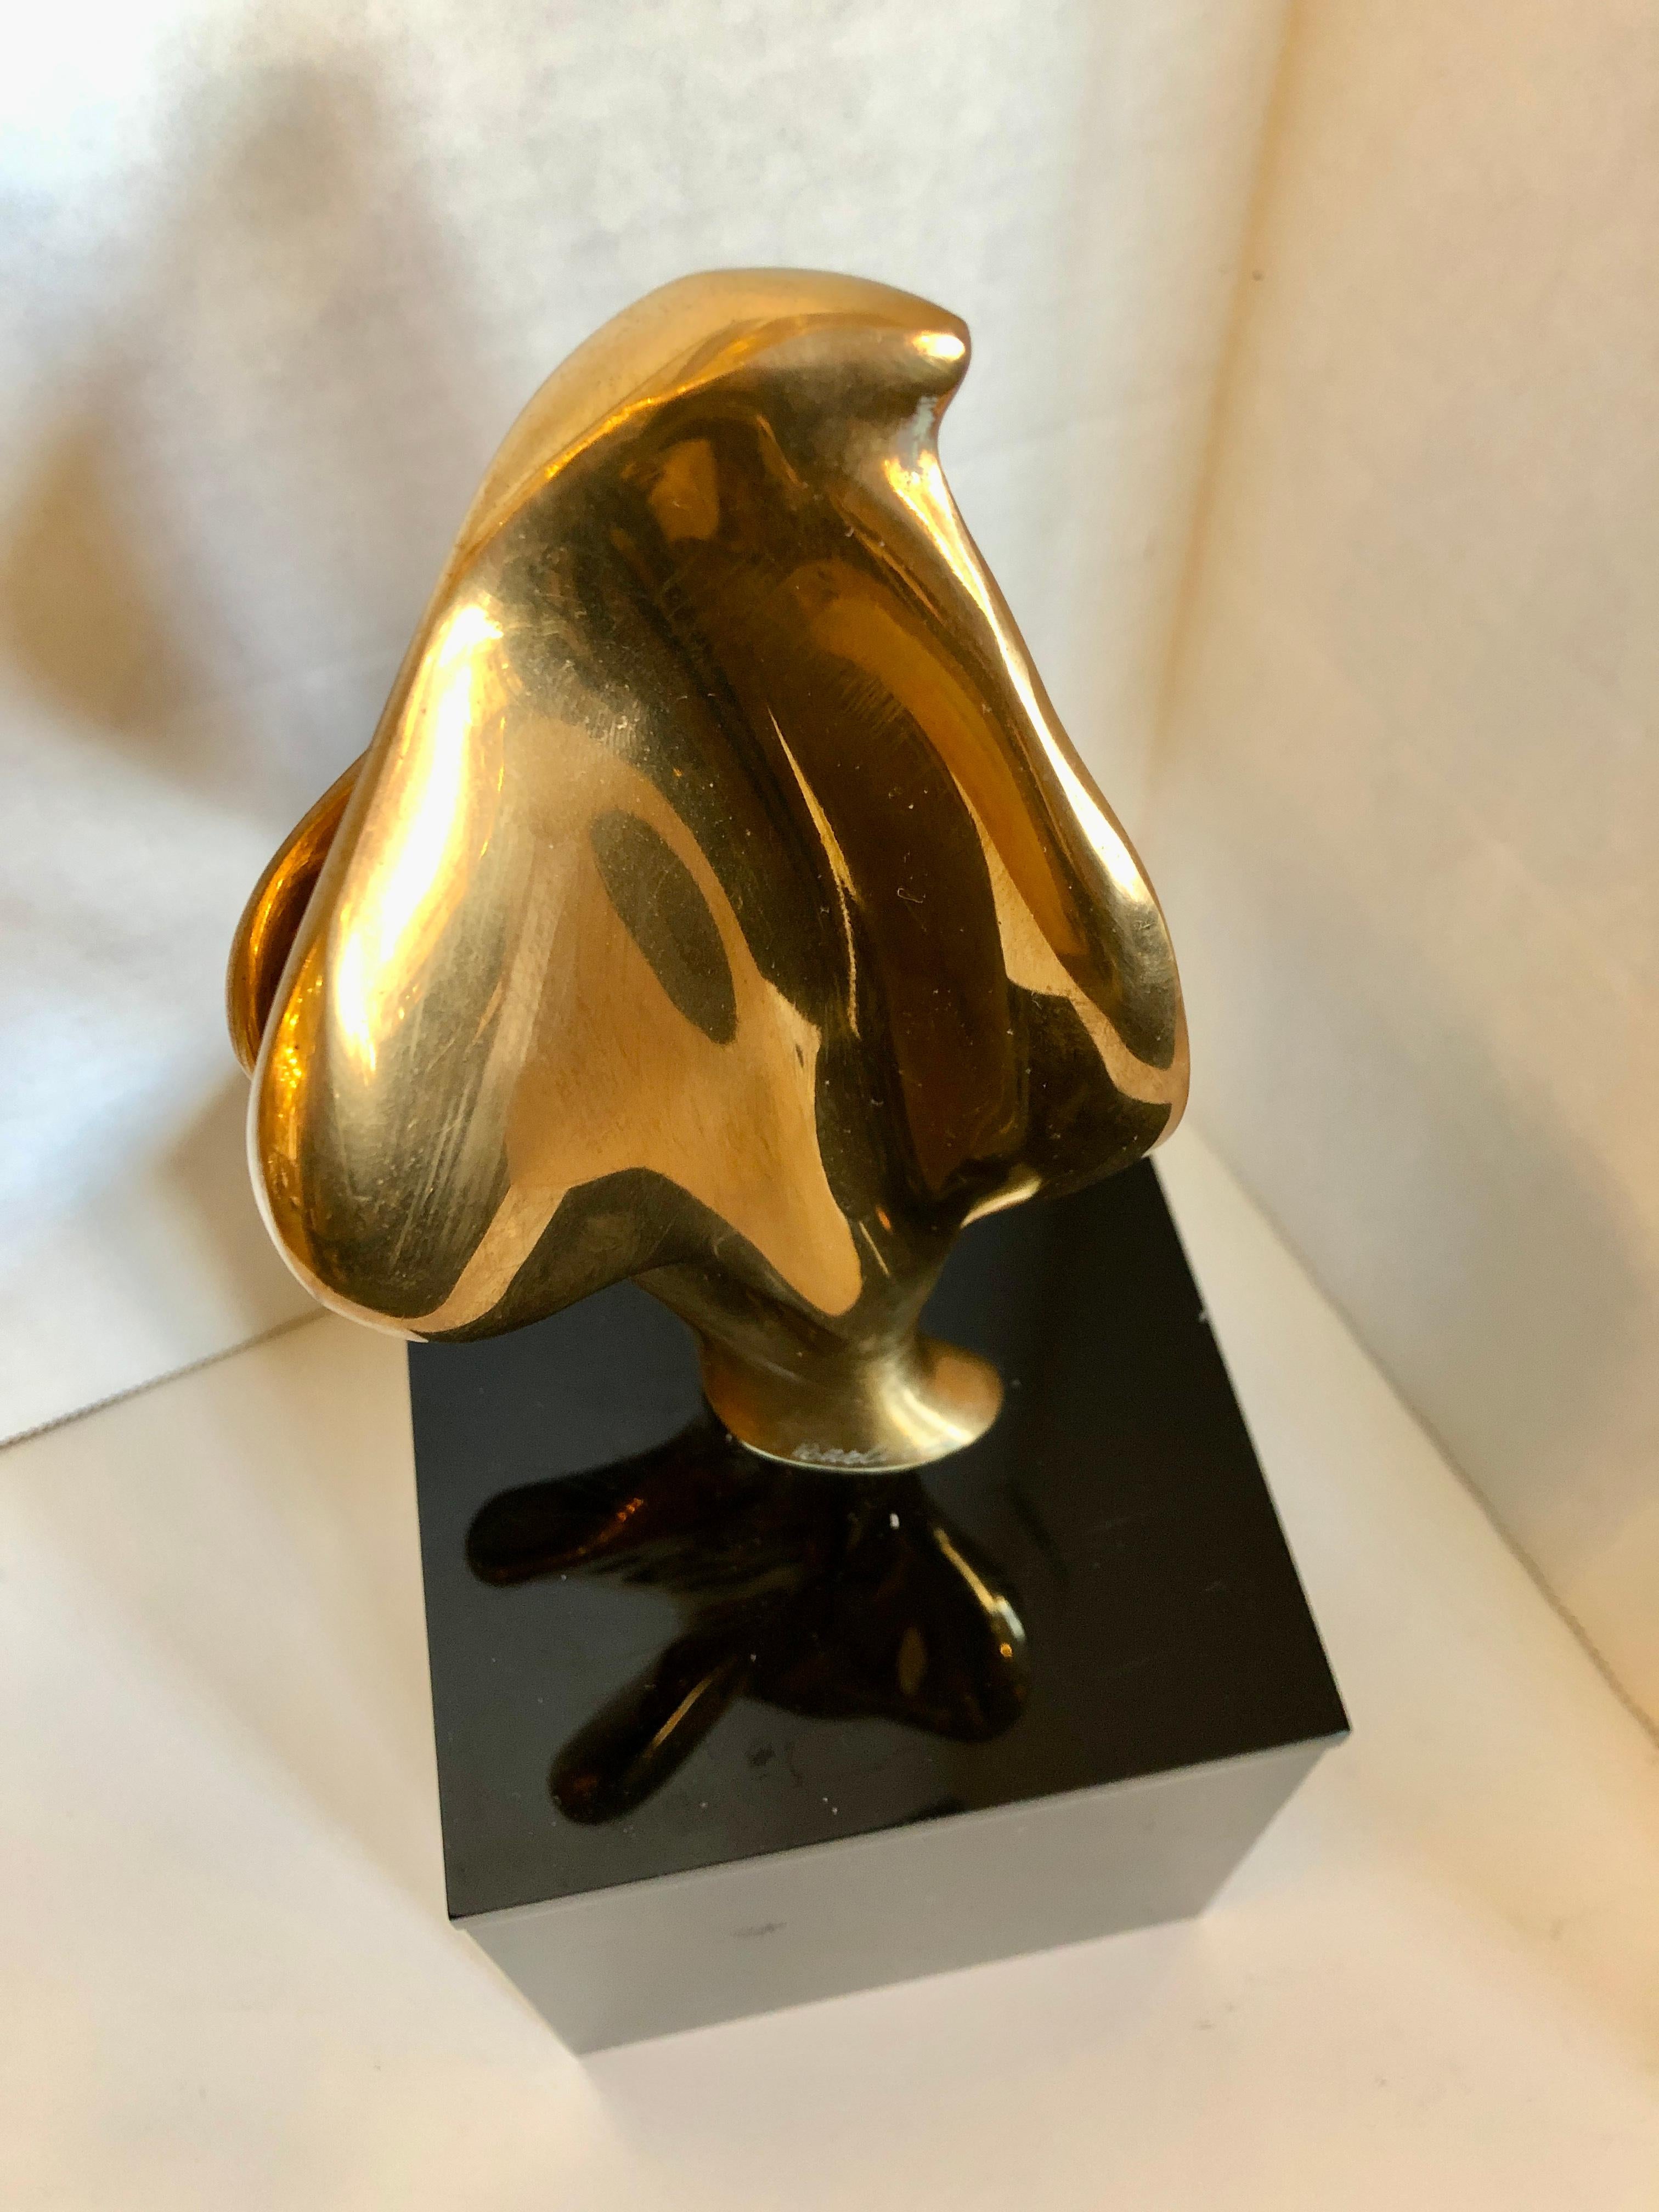 A Mid-Century Modern polished bronze biomorphic sculpture by Alfred Burlini raised on a black lucite base. Dated 1975 8/10.